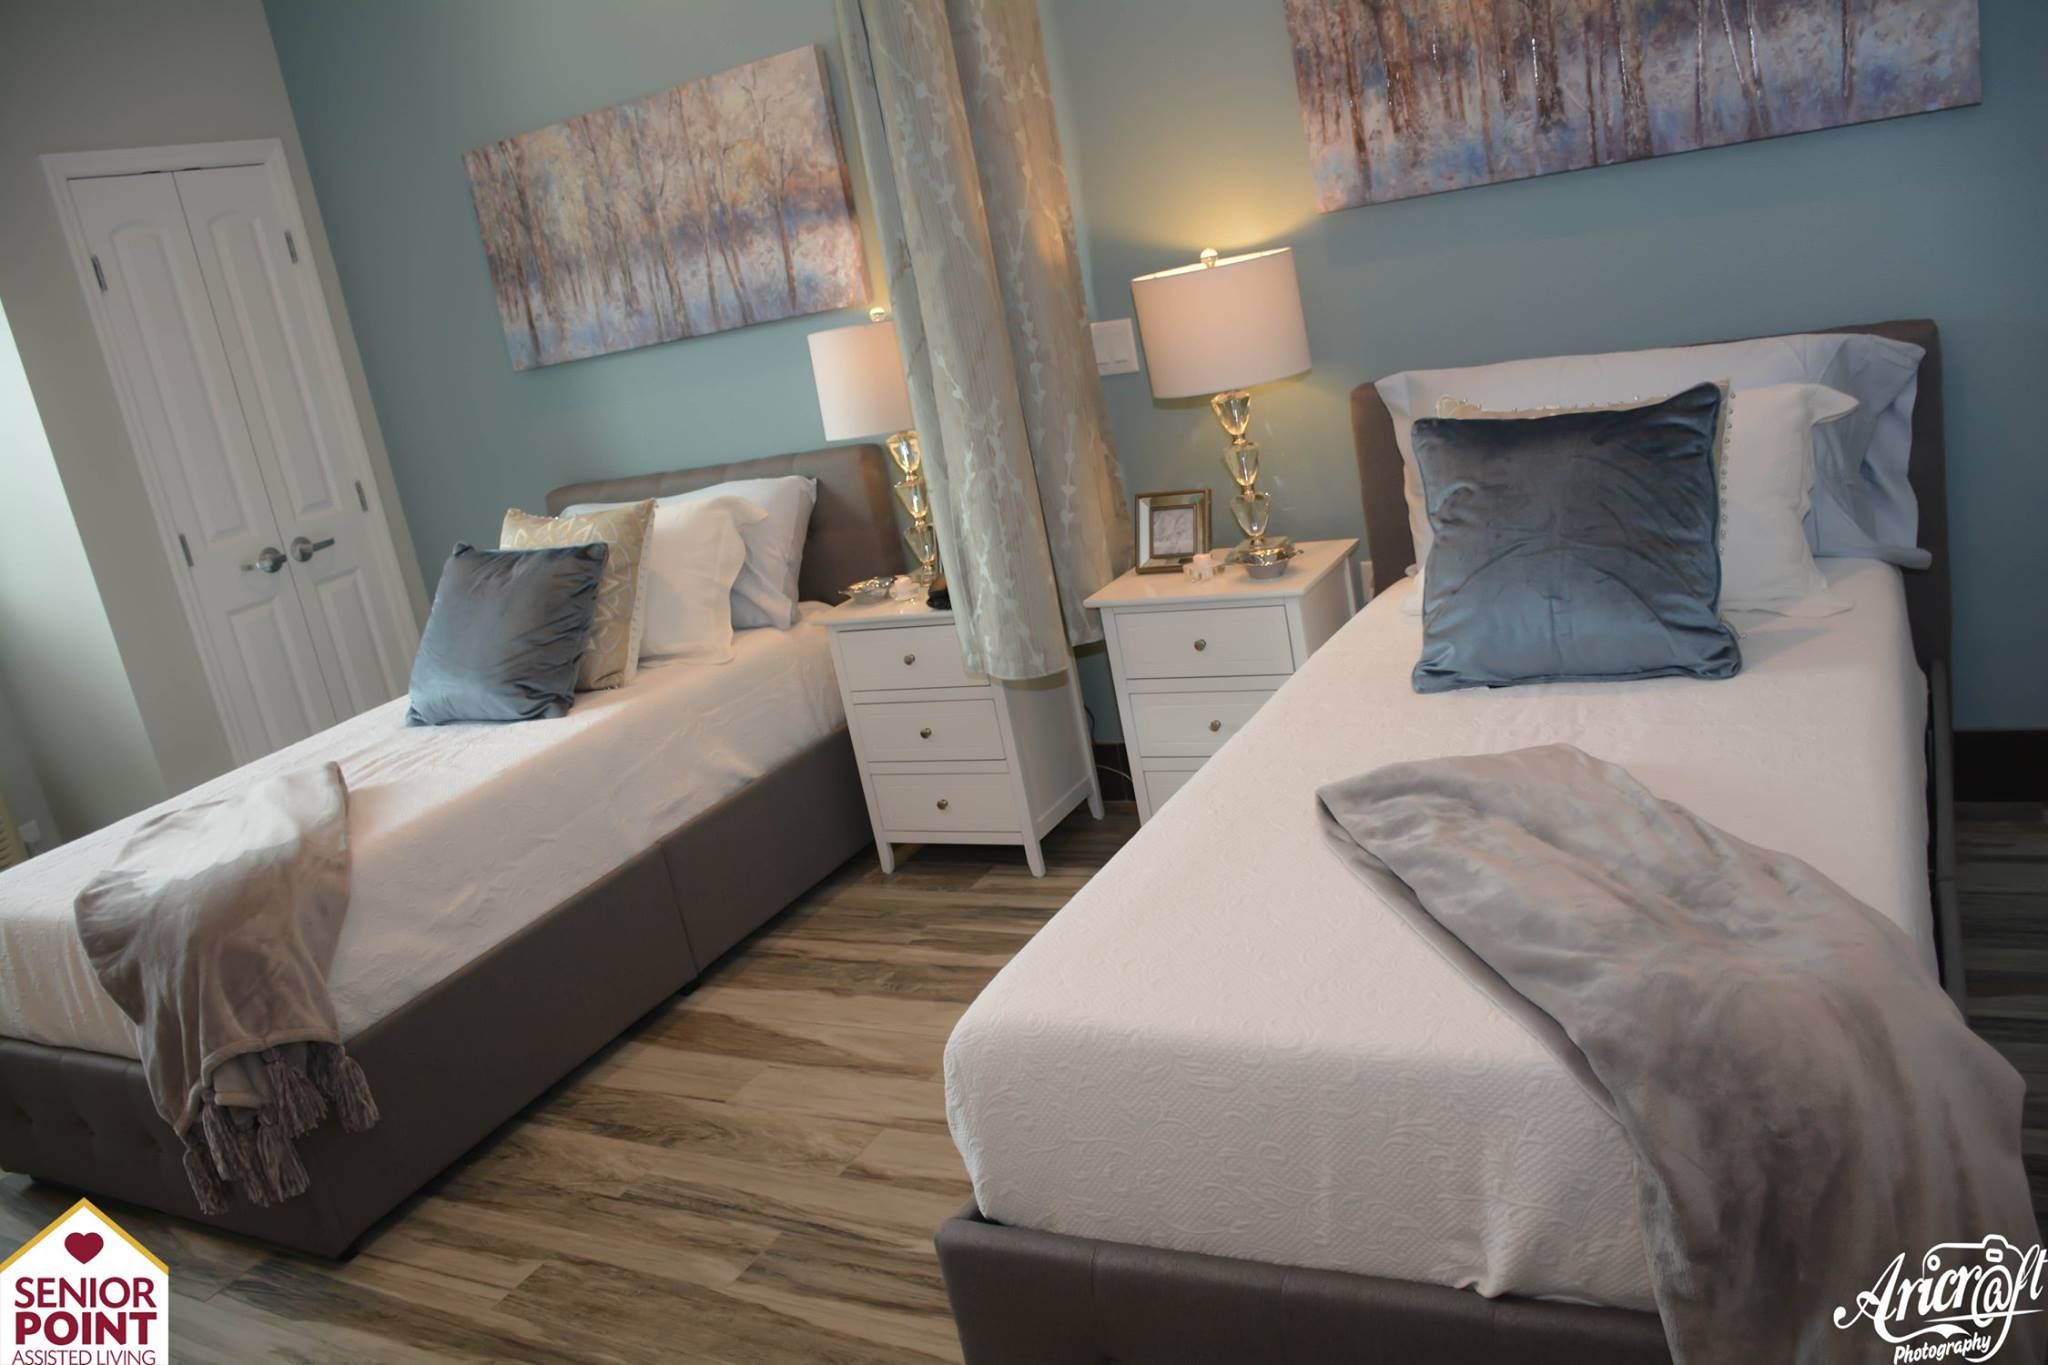 Interior view of Senior Point Assisted Living Facility featuring cozy bedroom decor and architecture.